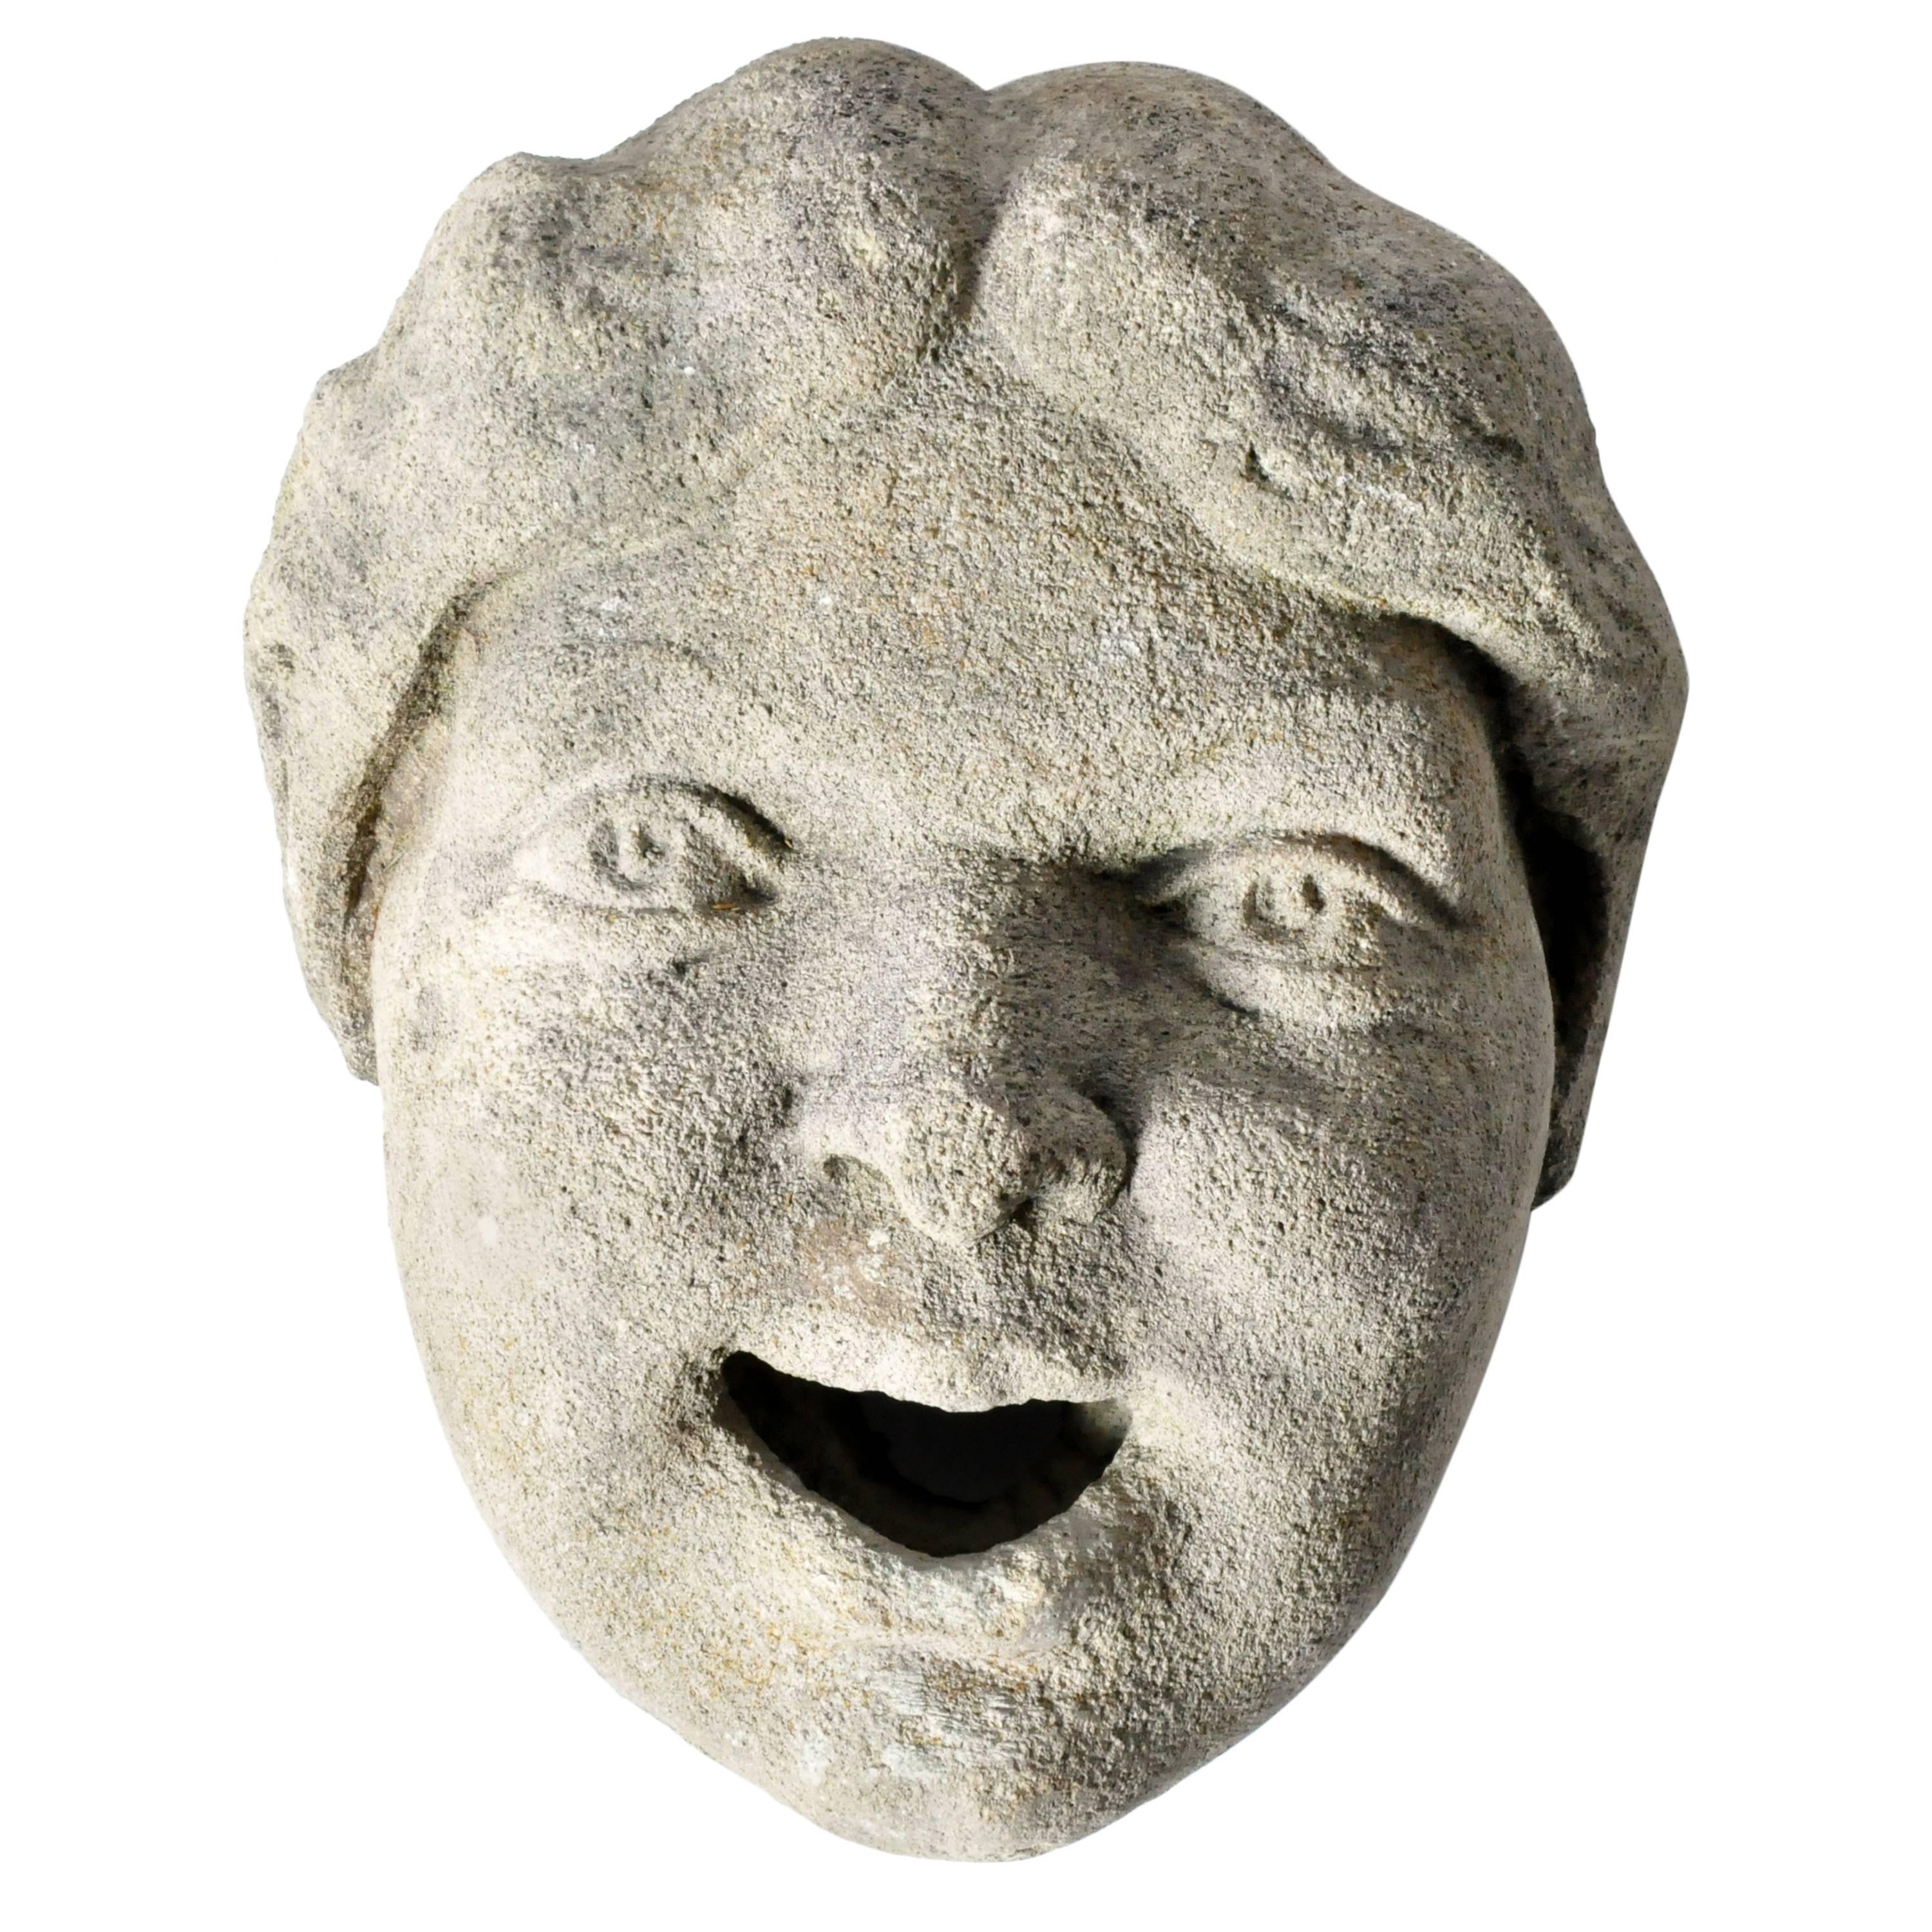 Stone Fragment of a Face